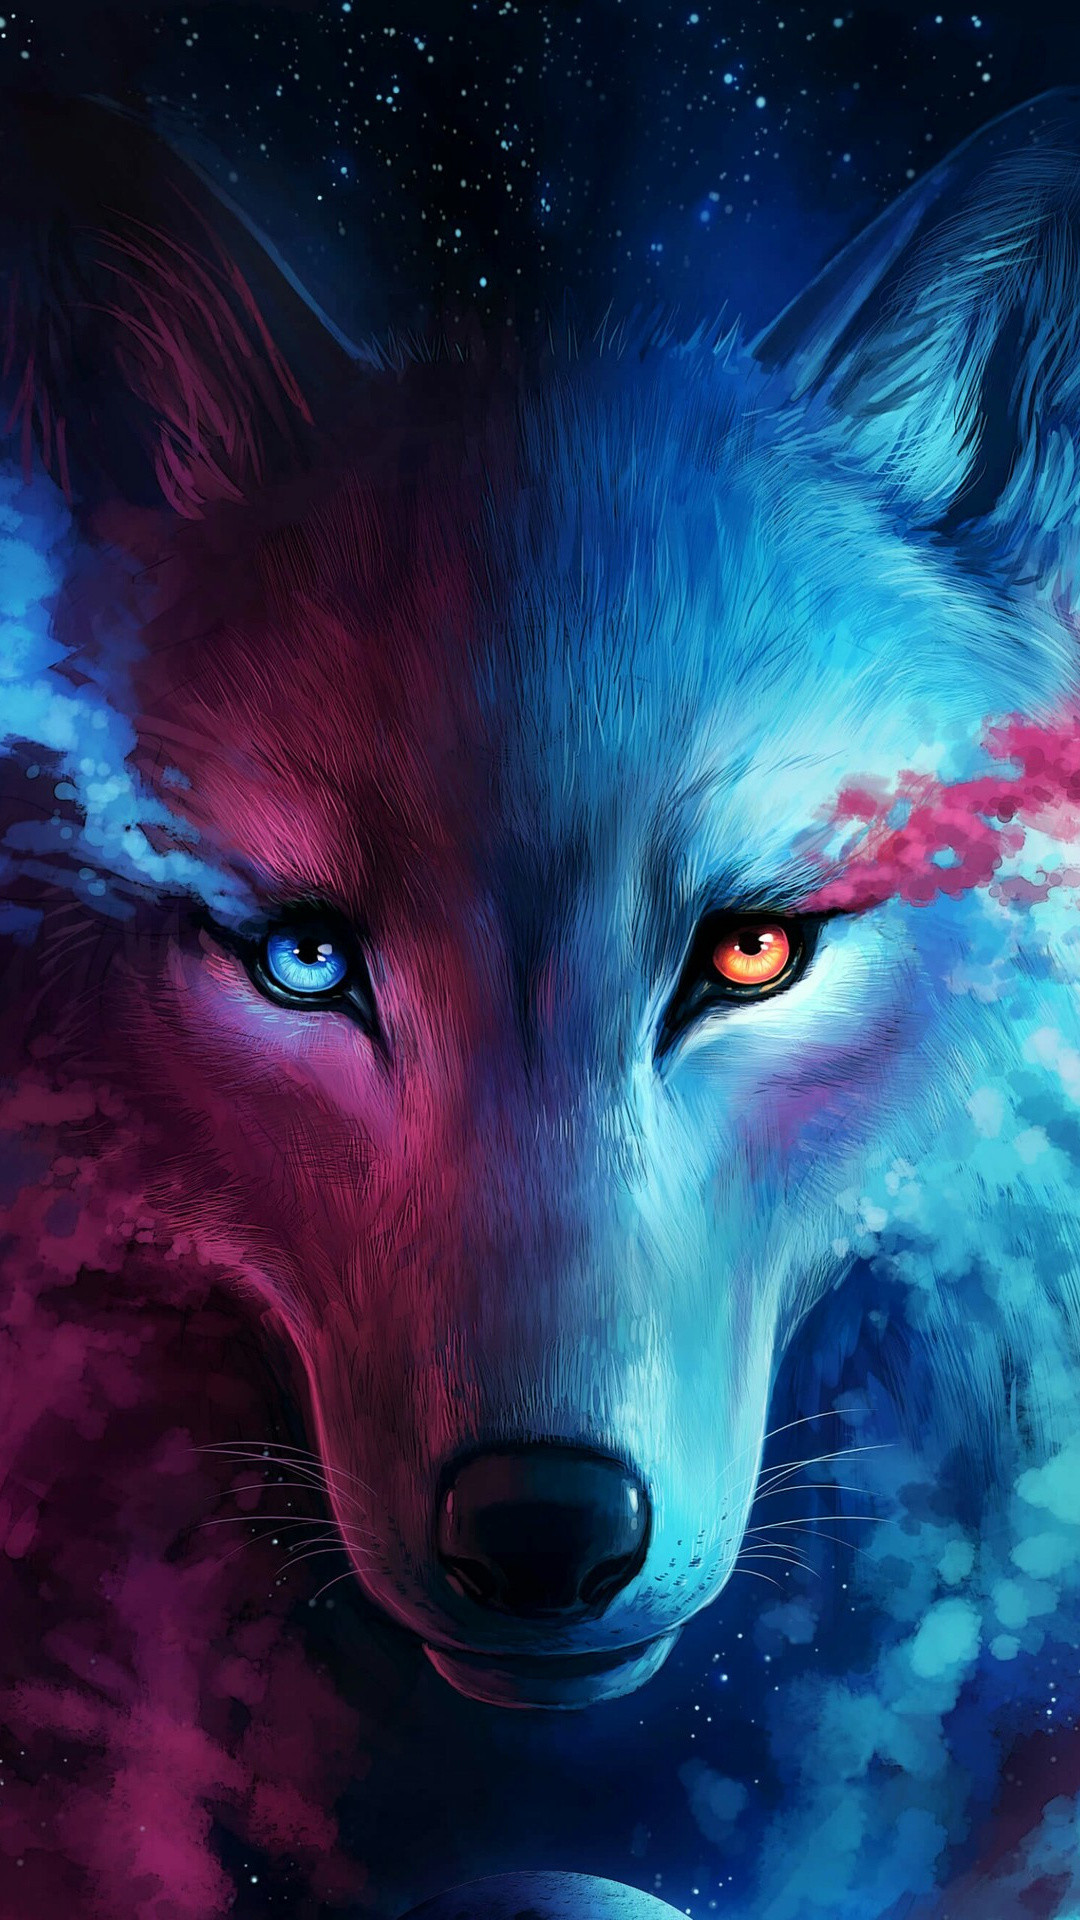 62+] Images of Wolf Wallpapers on